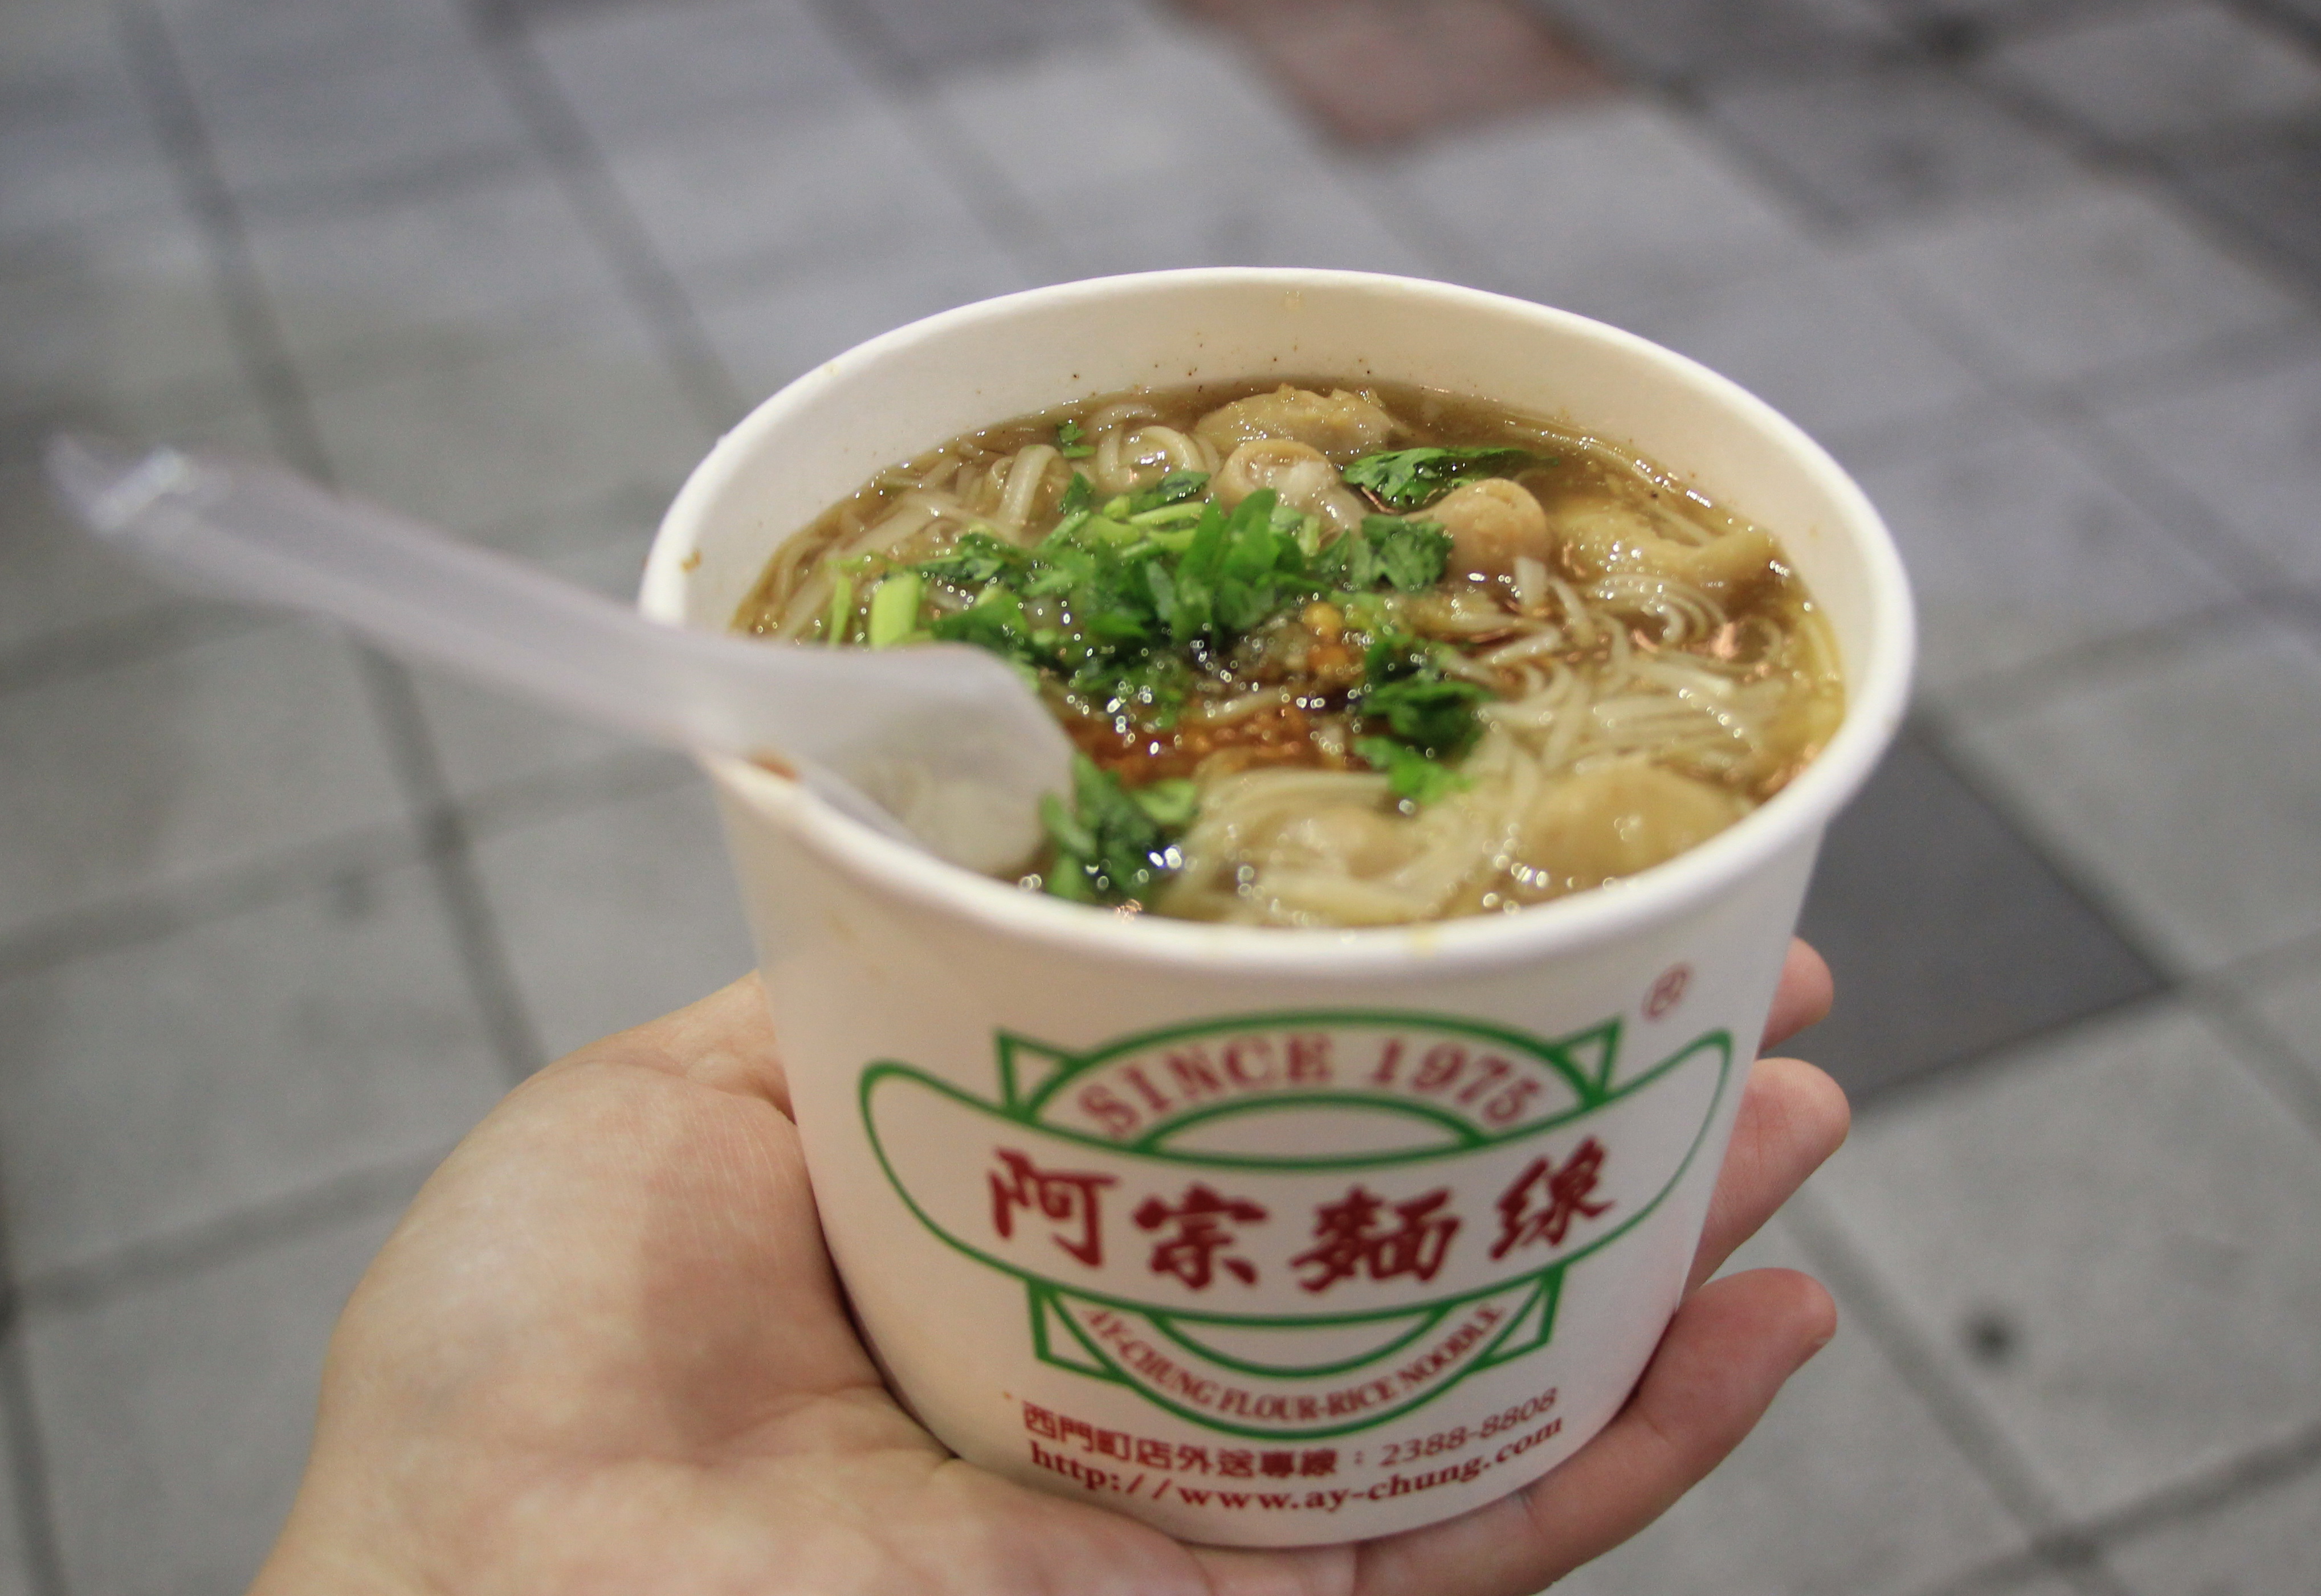 A bowl of Ay-Chung flour rice noodle - Photo: Dong Nguyen/ Tuoi Tre News